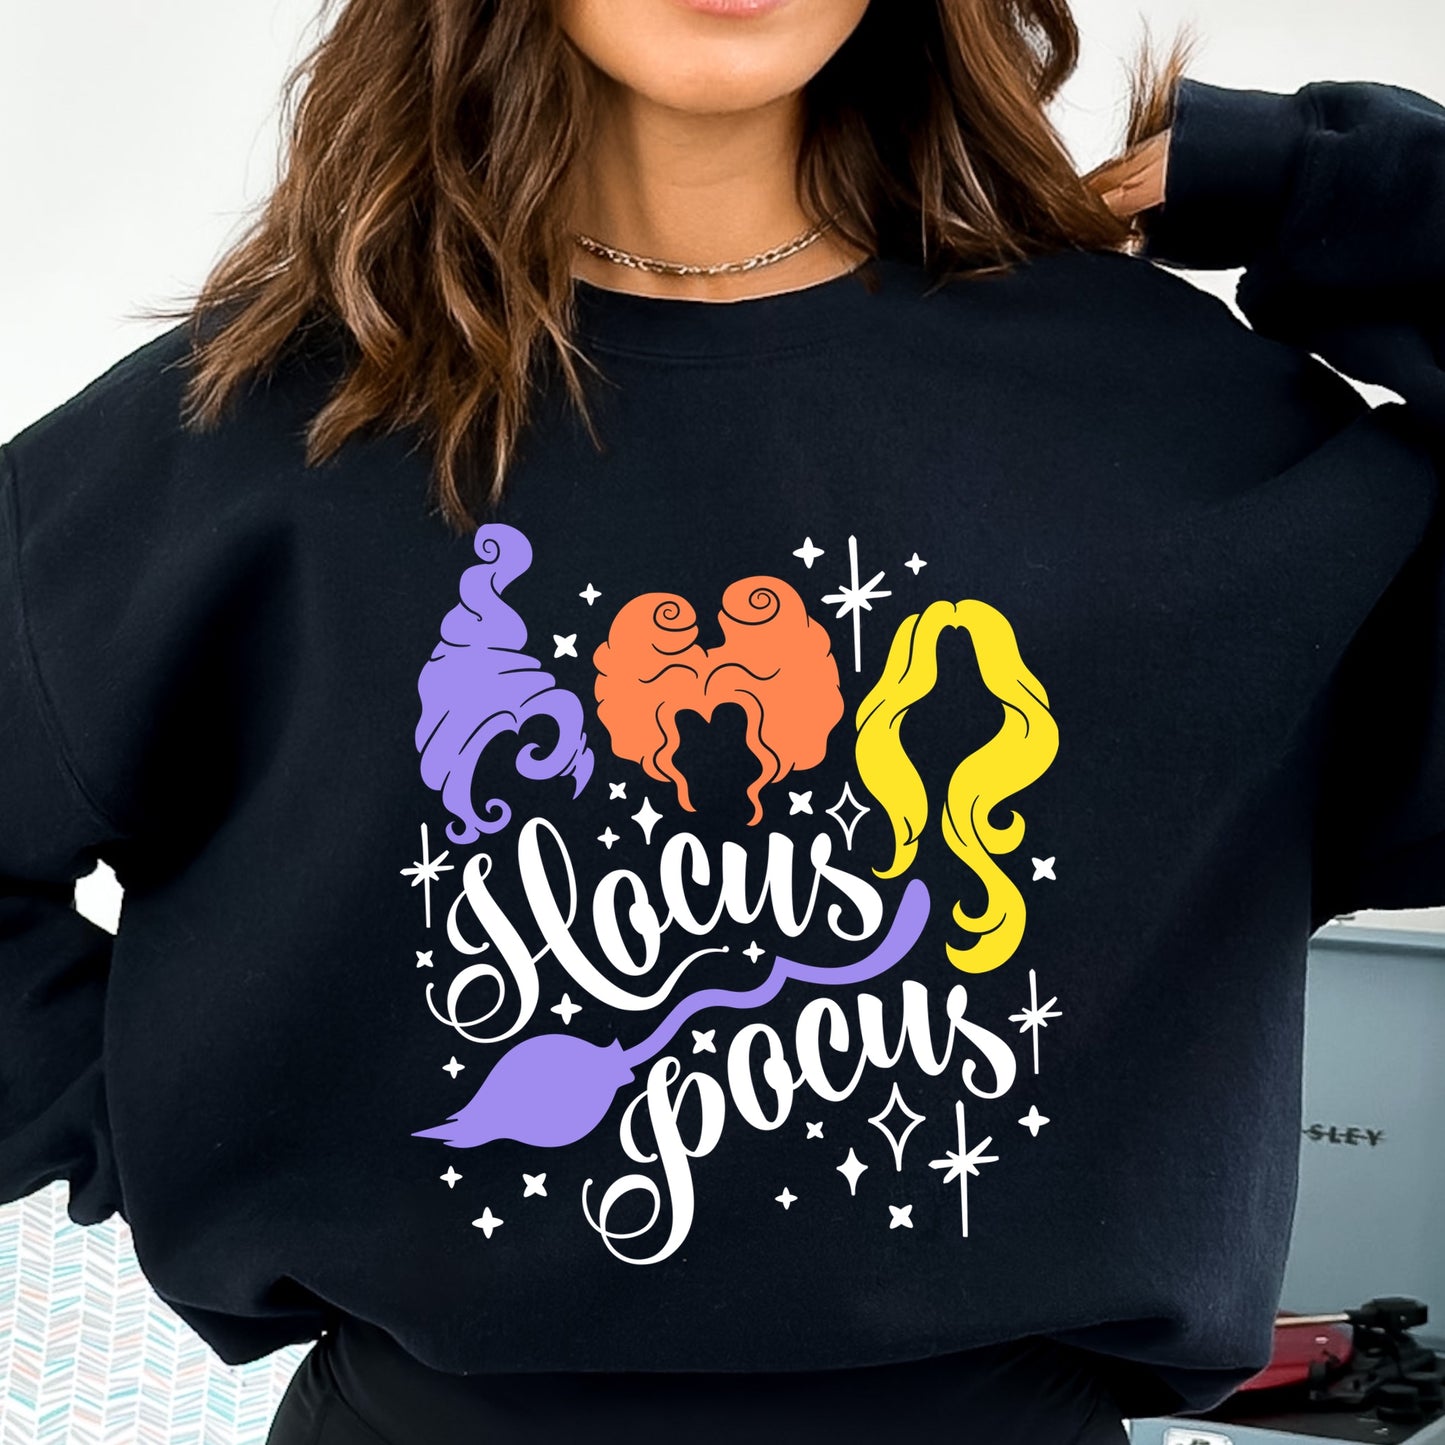 Iron on heat transfer with three witches and the phrase "Hocus Pocus" in white font.